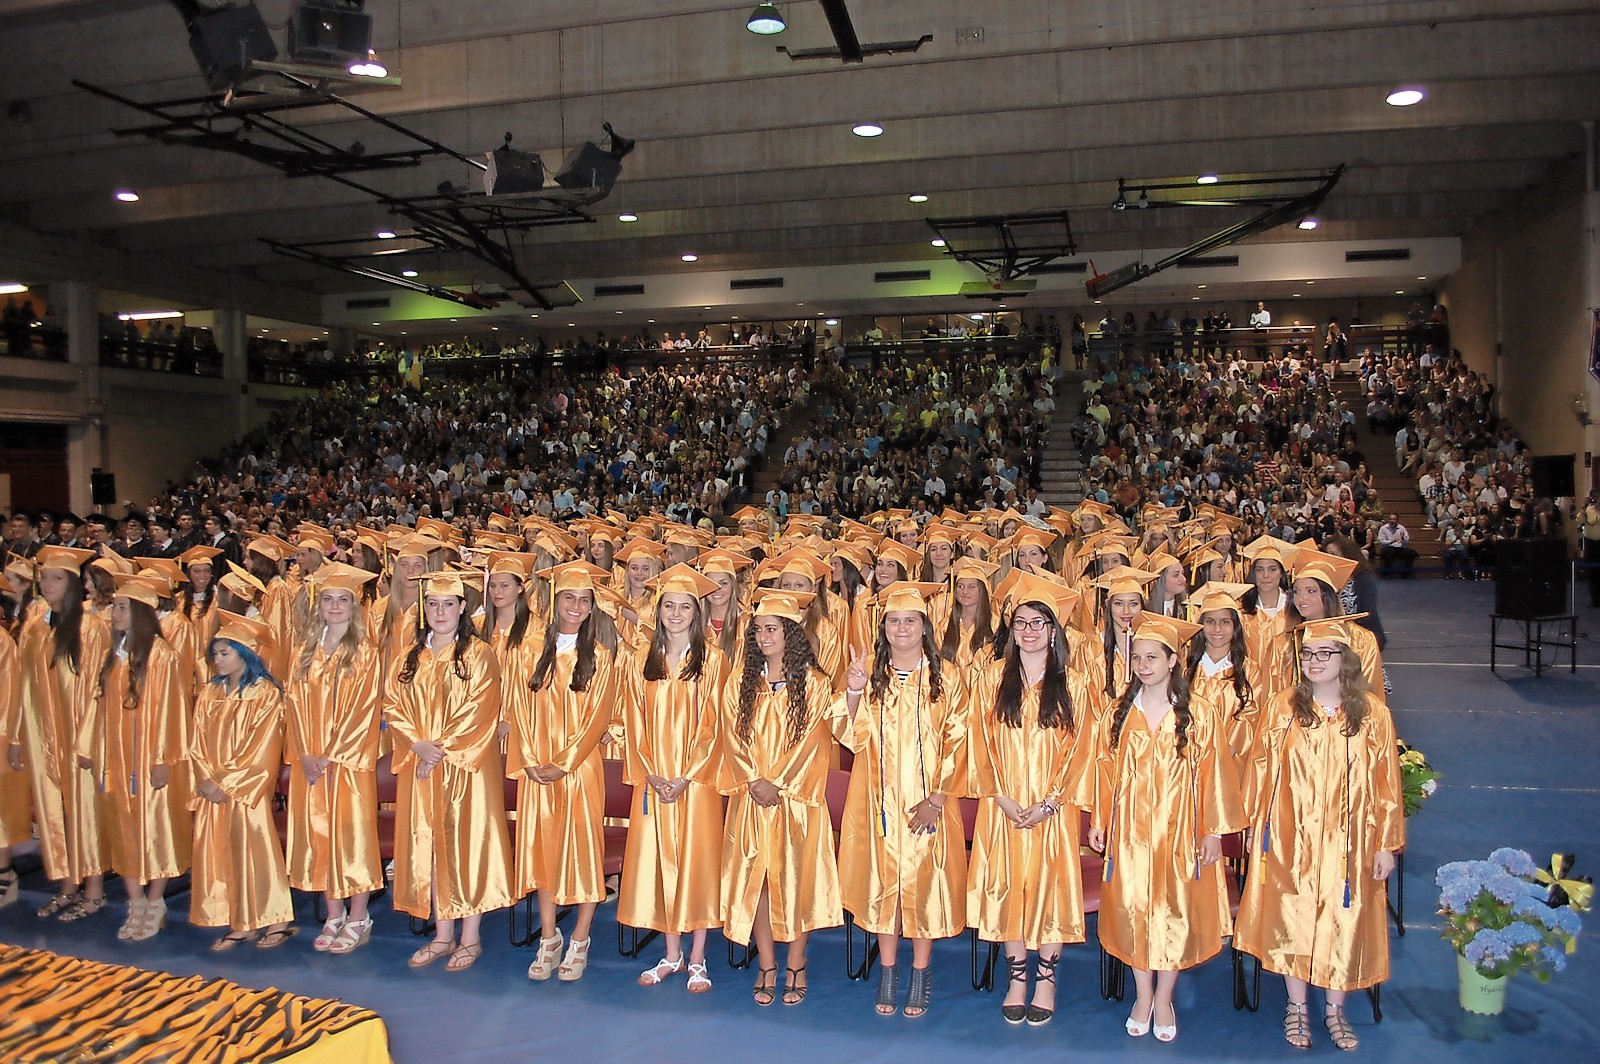 The girls were clad in gold at Wantagh High School’s graduation ceremony on June 23 at Nassau Community College.